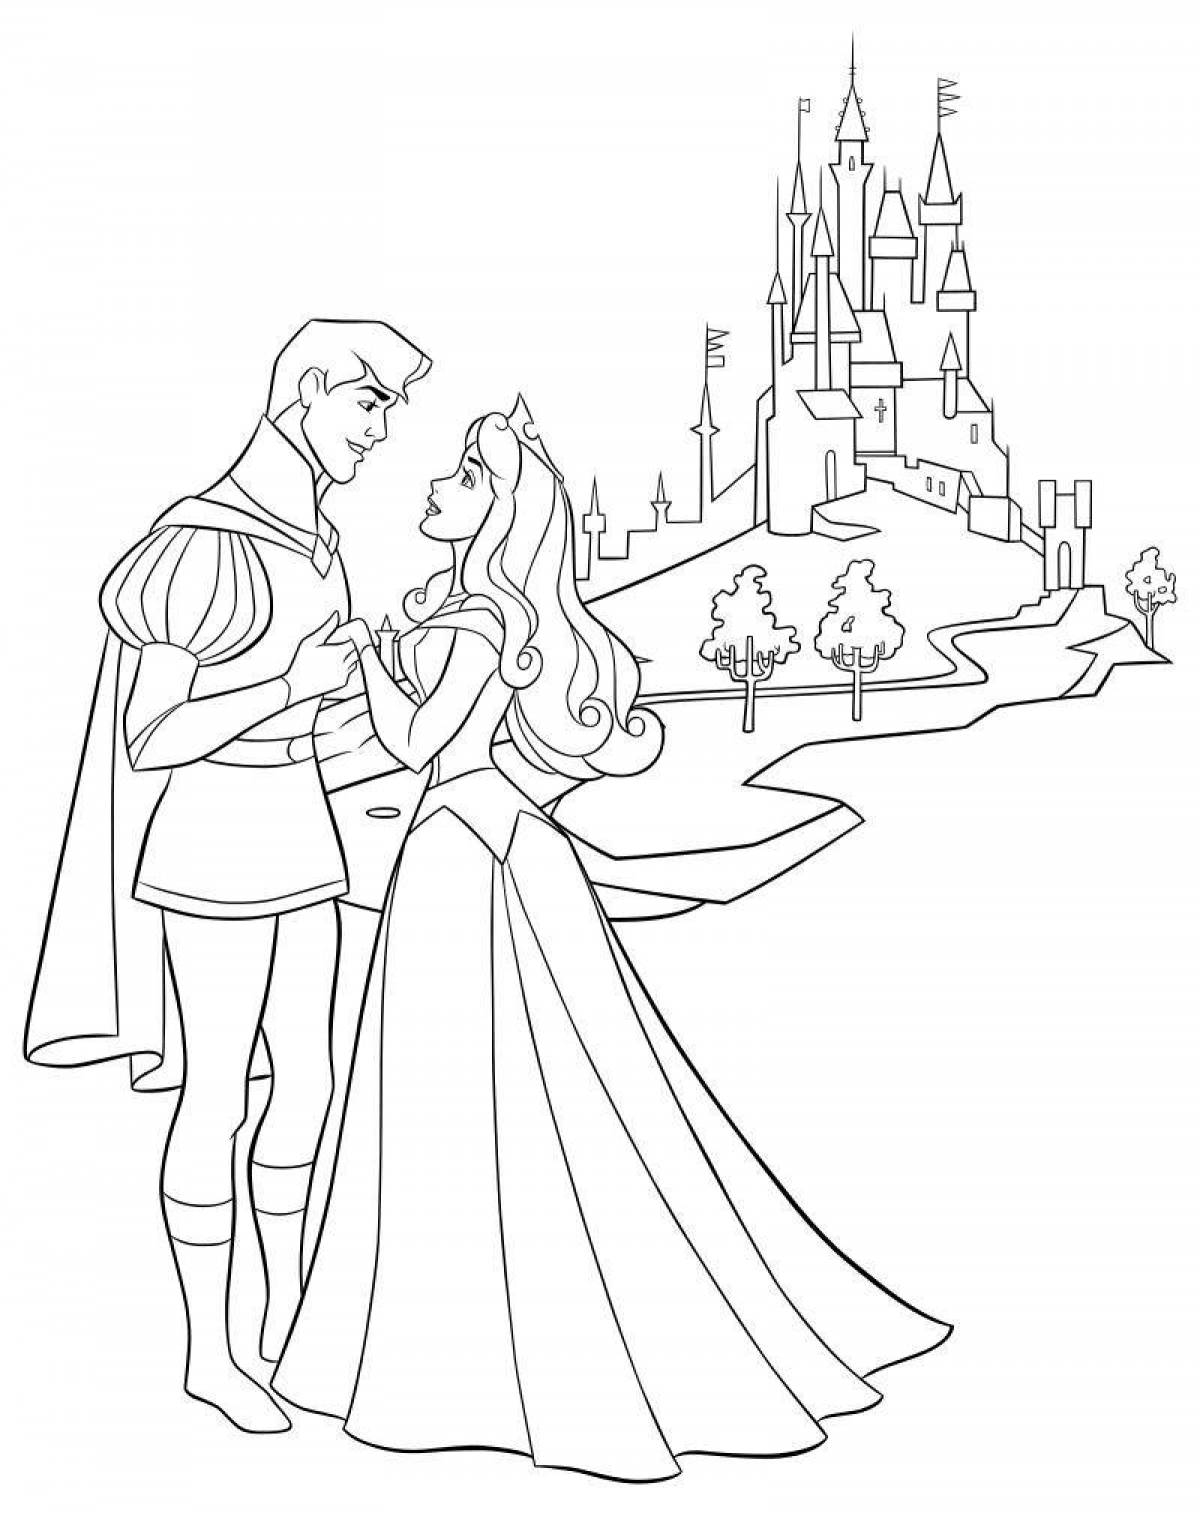 Amazing coloring pages of prince and princess